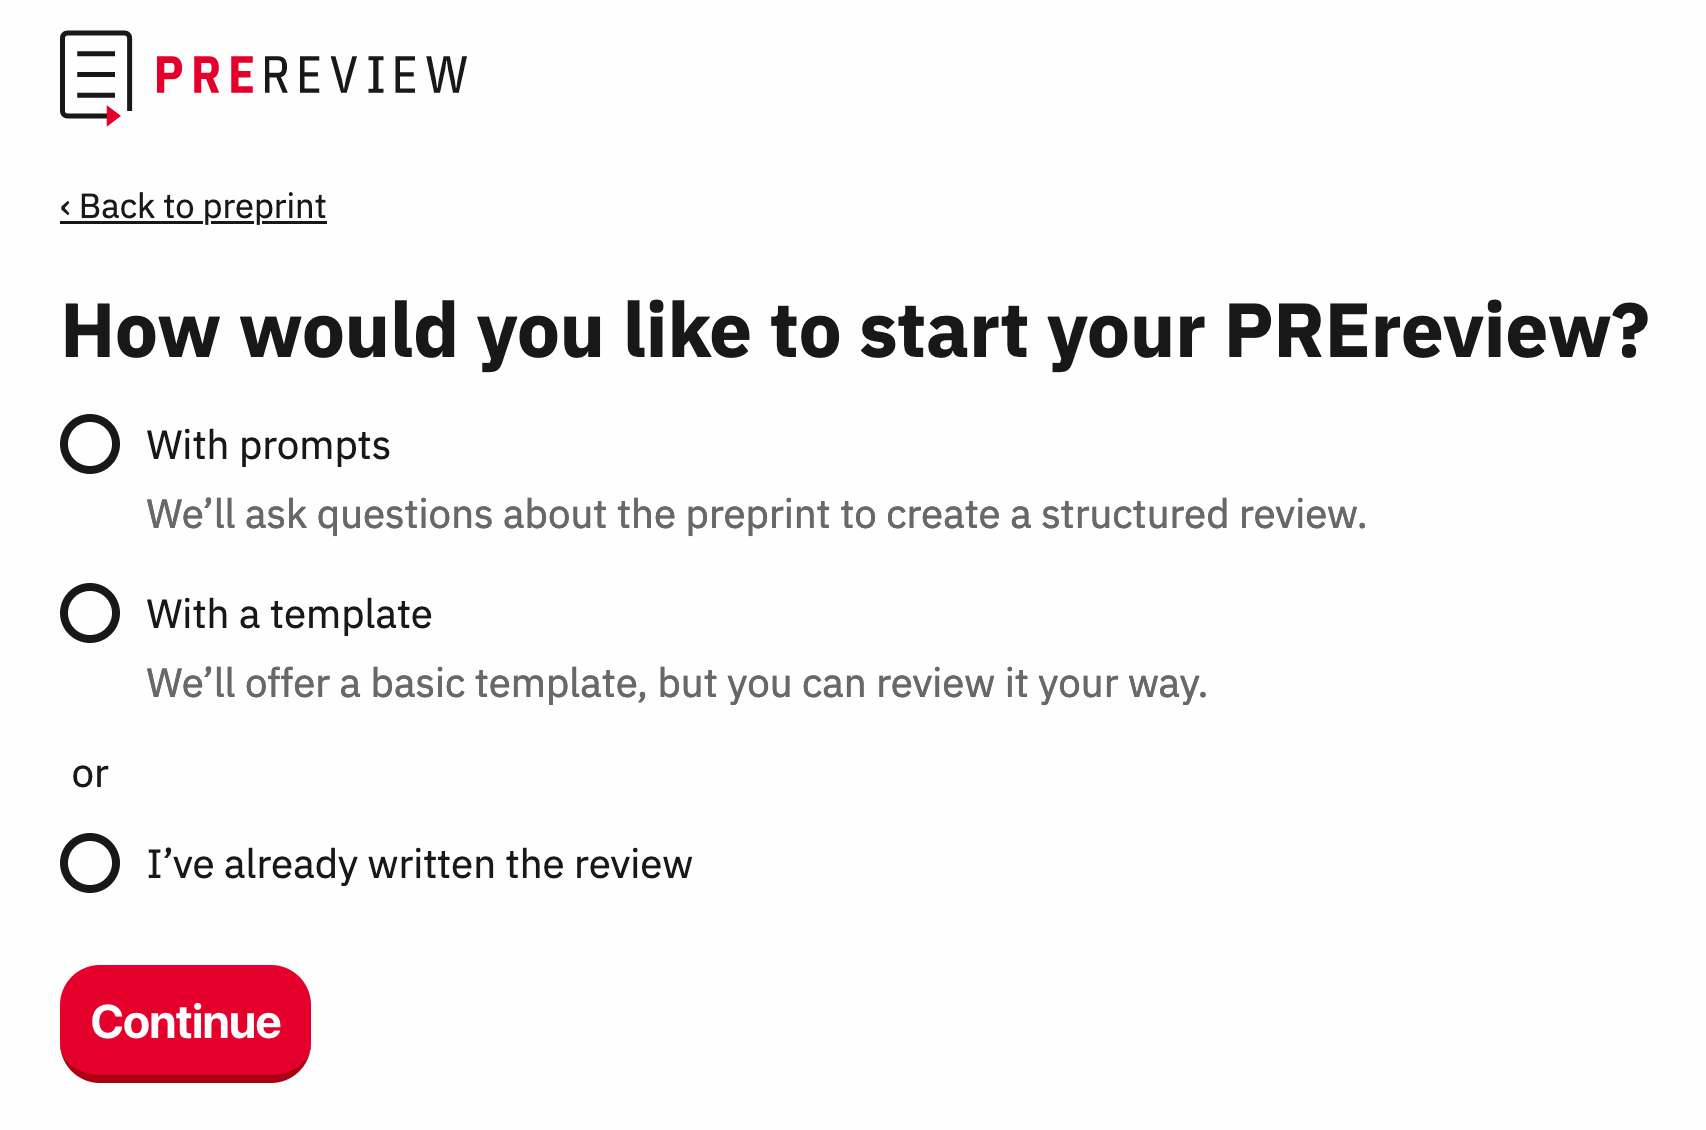 A screenshot from PREreview.org showing an author's choices between starting a Structured, Templated, or Freeform PREreview.